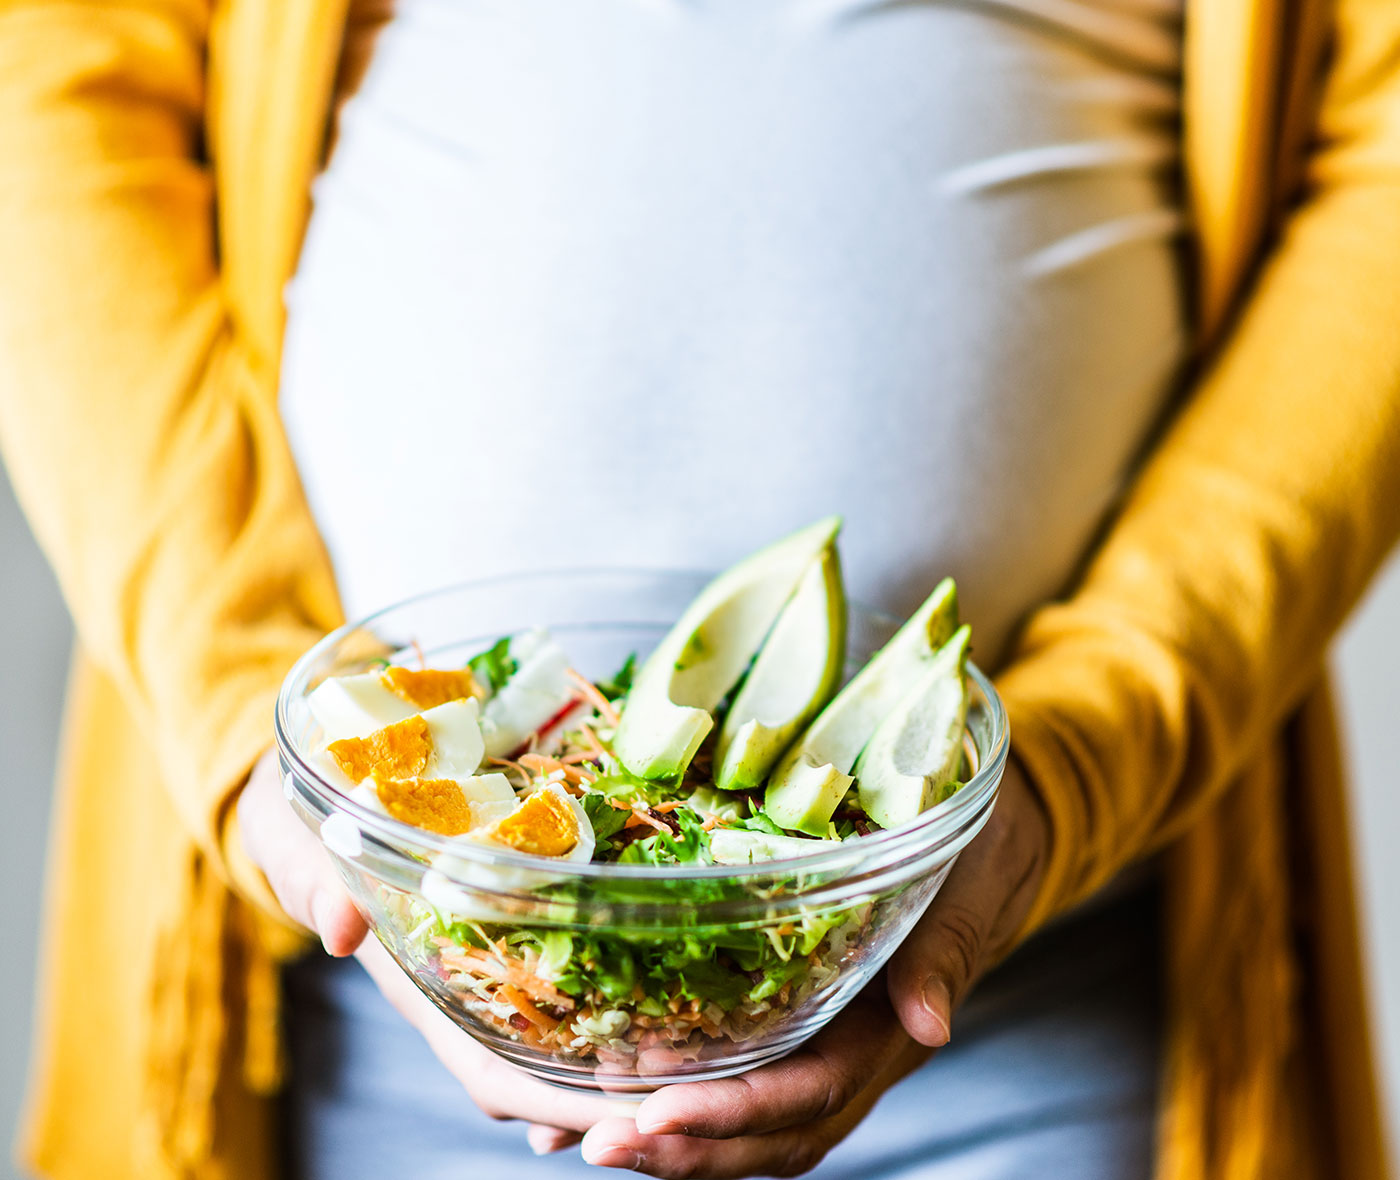 Pregnancy and healthy nutrition. Close-up of a pregnant woman's belly, holding vegetable salad.